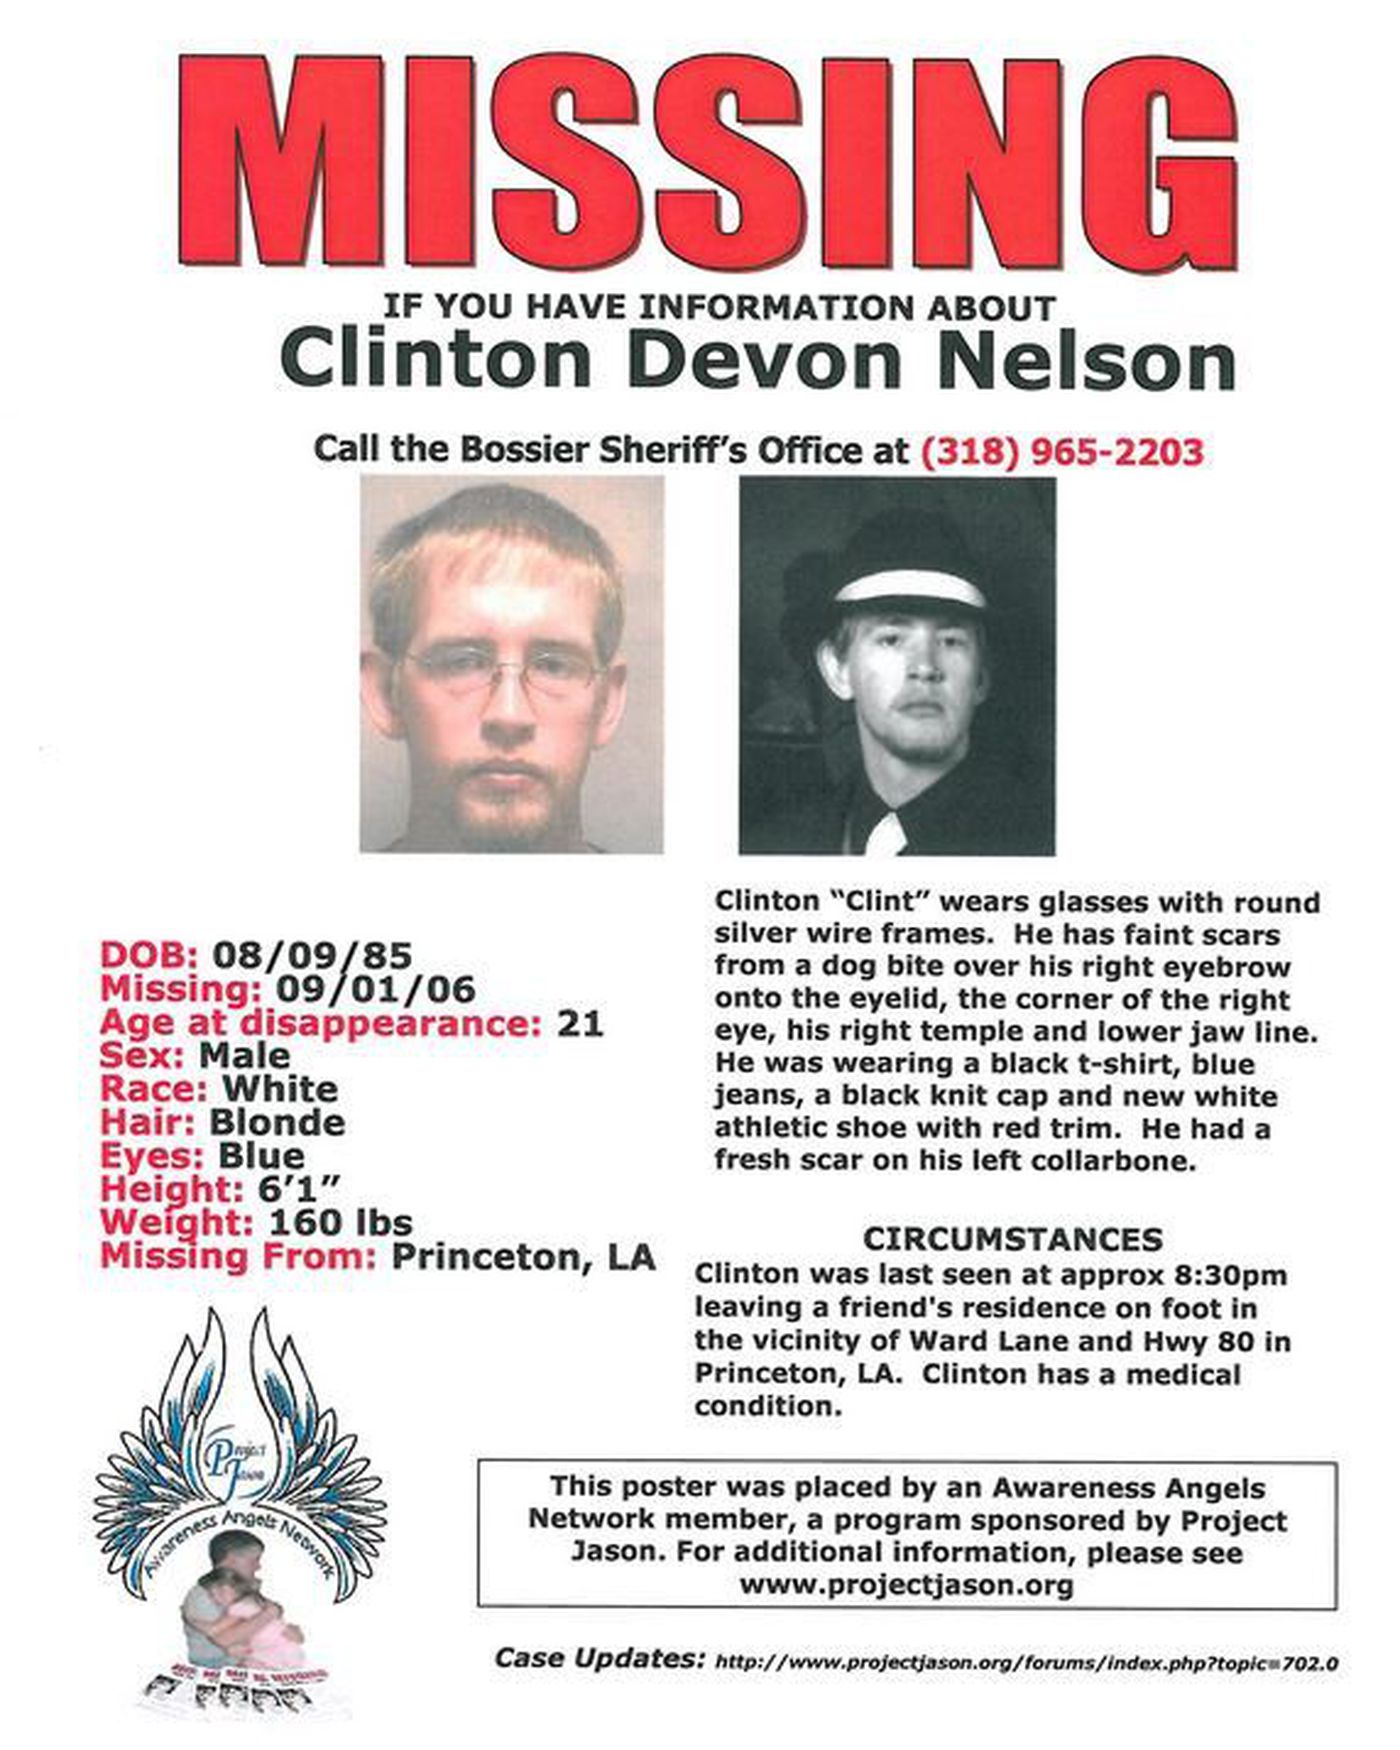 Clint Nelson went missing on September 1, 2006, and was last seen at a party by Highway 8 and Ward Lane in Princeton, #LOUISIANA